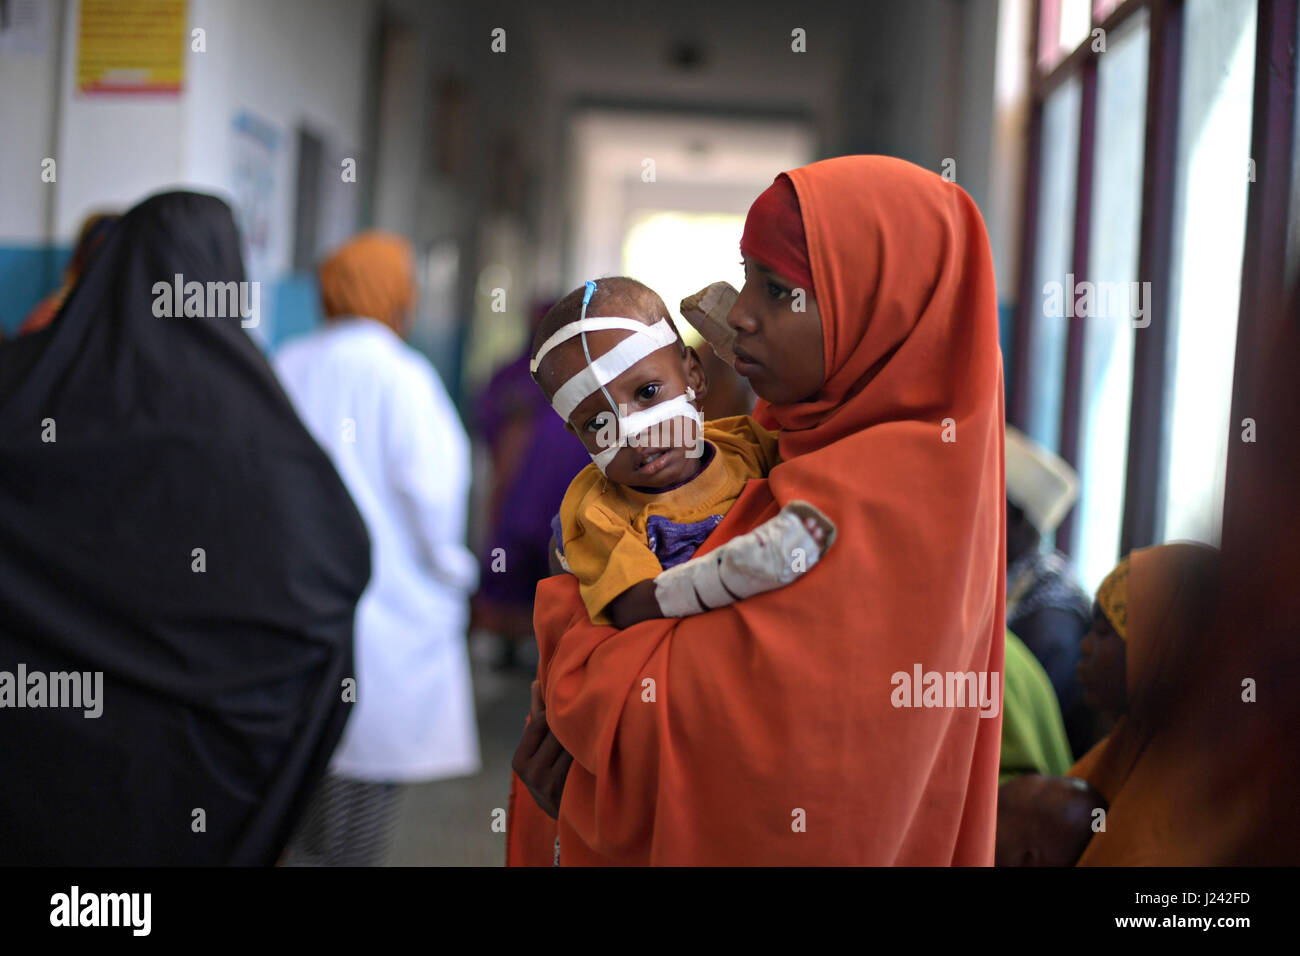 A Somalia women holds her malnourished child fitted with a nasogastric tube inside a ward dedicated for diarrhea patients at the Banadir hospital March 9, 2017 in Mogadishu, Somalia. Somalia is experiencing a severe drought, and may be on the brink of famine unless urgent humanitarian action is taken soon. Stock Photo